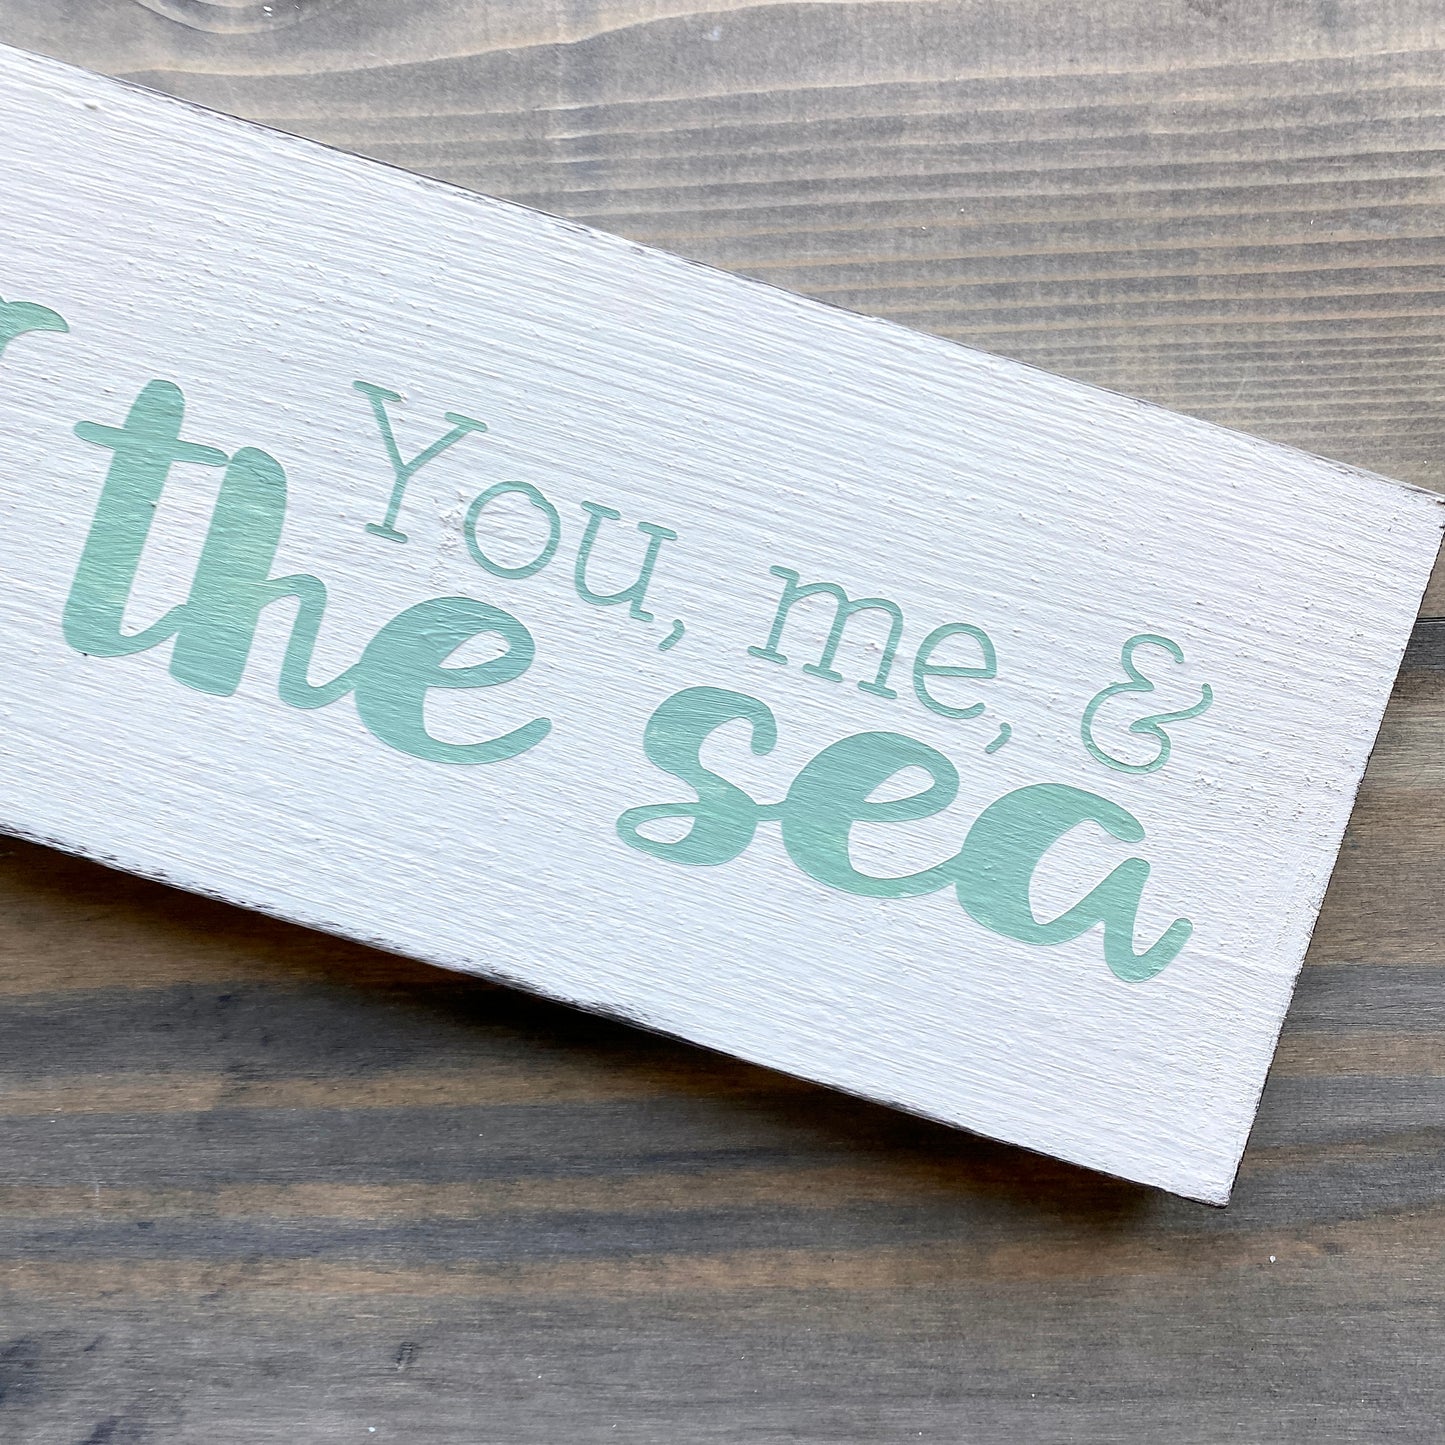 You, me, and the sea sign